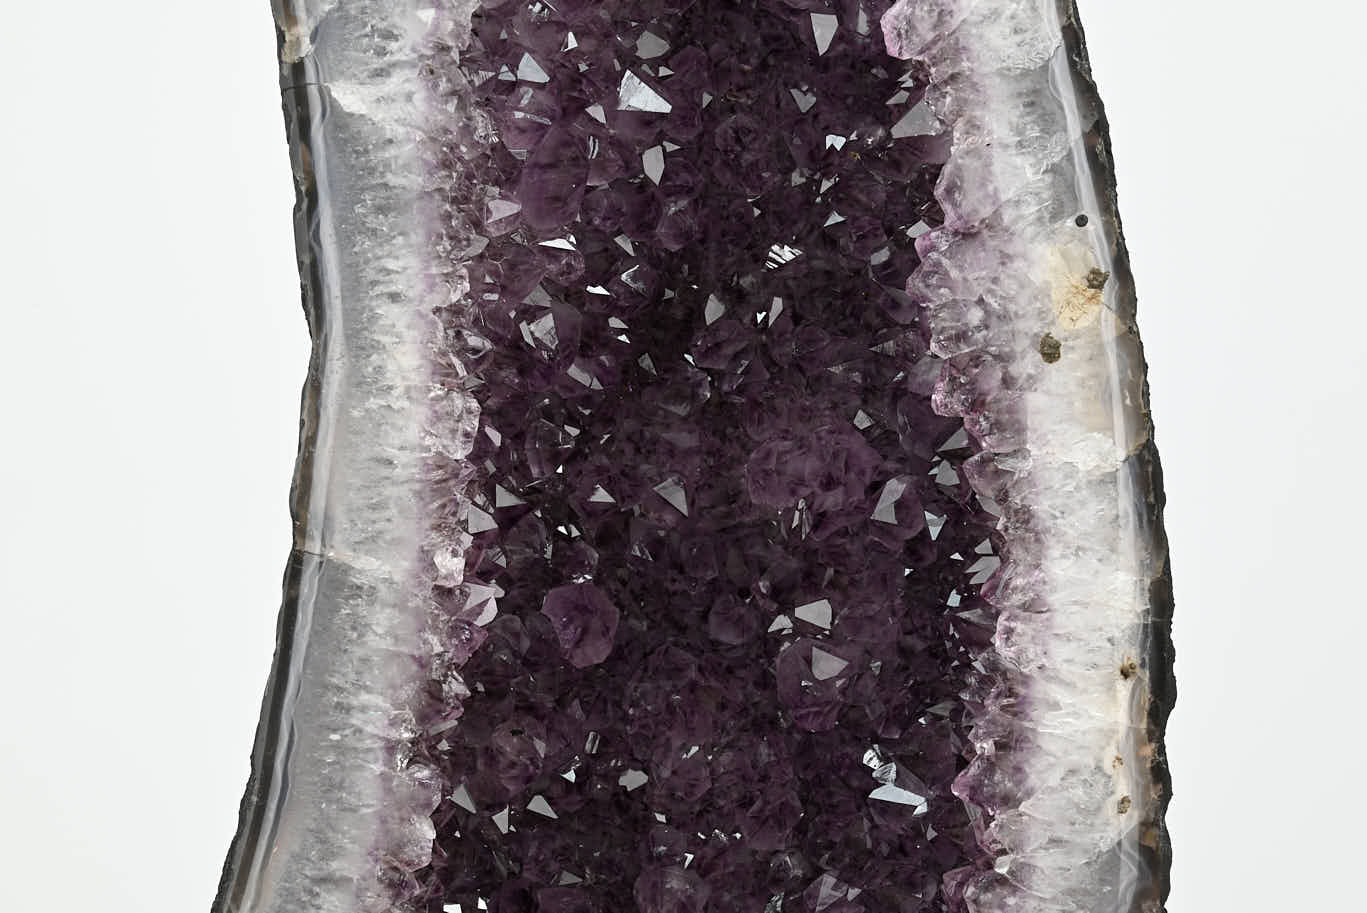 Extra Quality Amethyst Cathedral - 16.8kg, 57cm tall - #CAAMET-10072